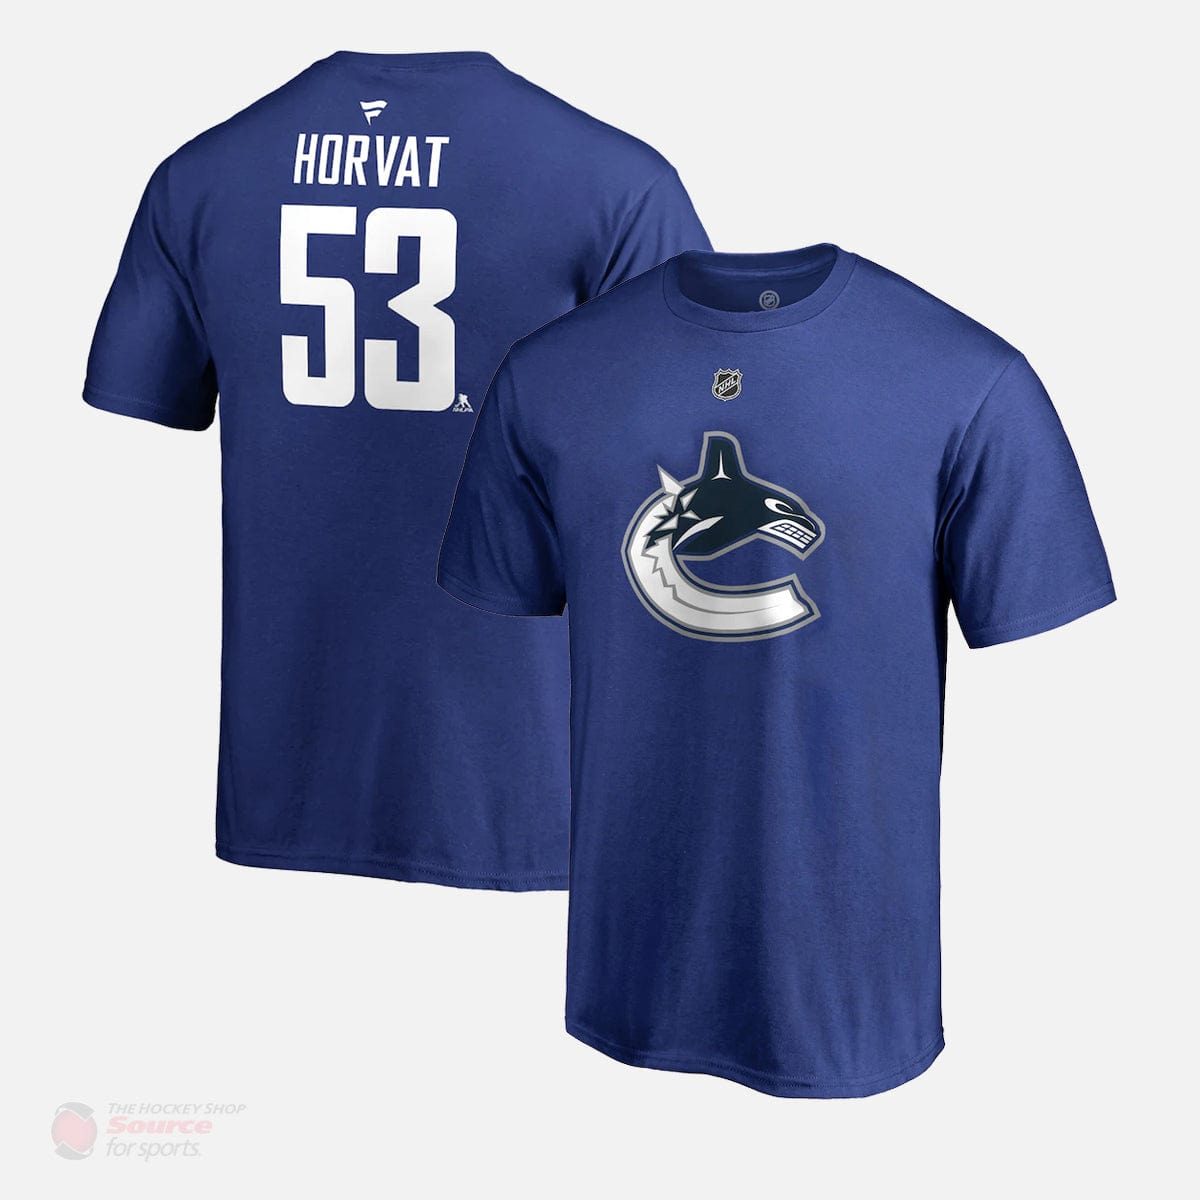 Vancouver Canucks Fanatics Authentic Name & Number Mens Shirt - Bo Horvat